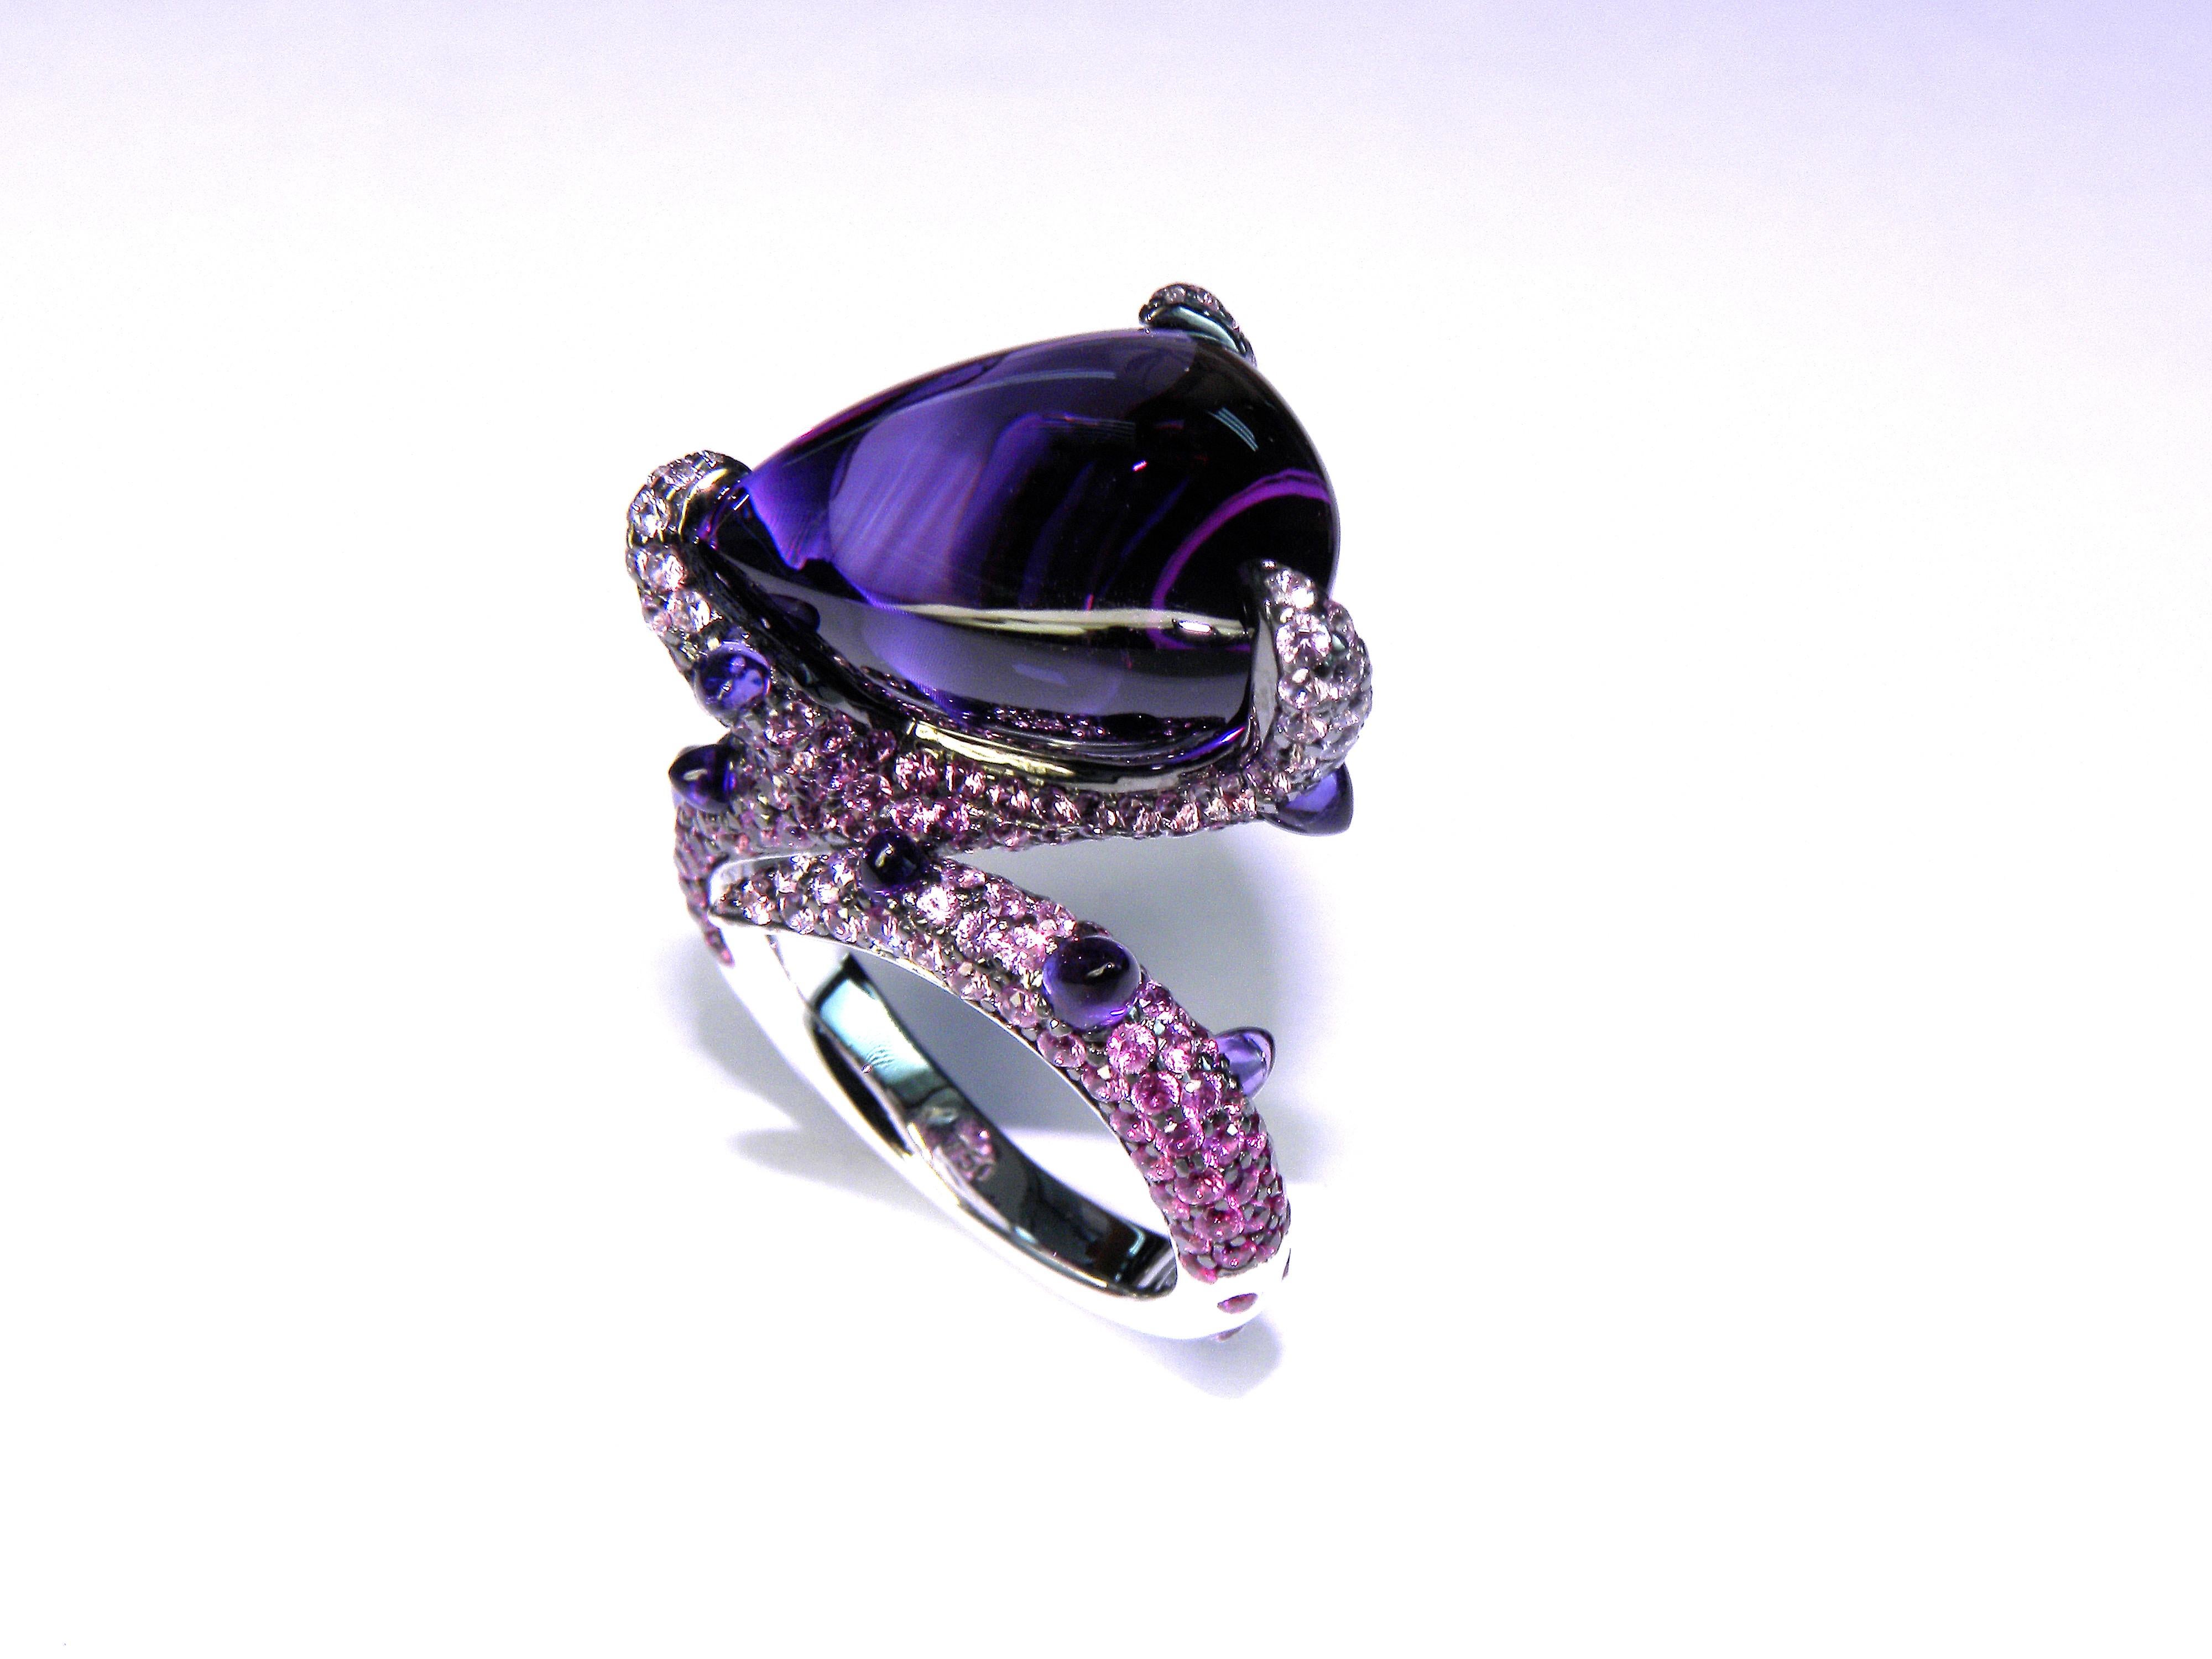 Cabouchon central amethyst with pink sapphires ring in 18k gold 
Central Amethyst  18.35 cts
Pink Saphires 2.70 cts
Size Europe 53 , USA 6.5 
Can be resized 

Irama Pradera is a dynamic and outgoing designer from Spain that searches always for the